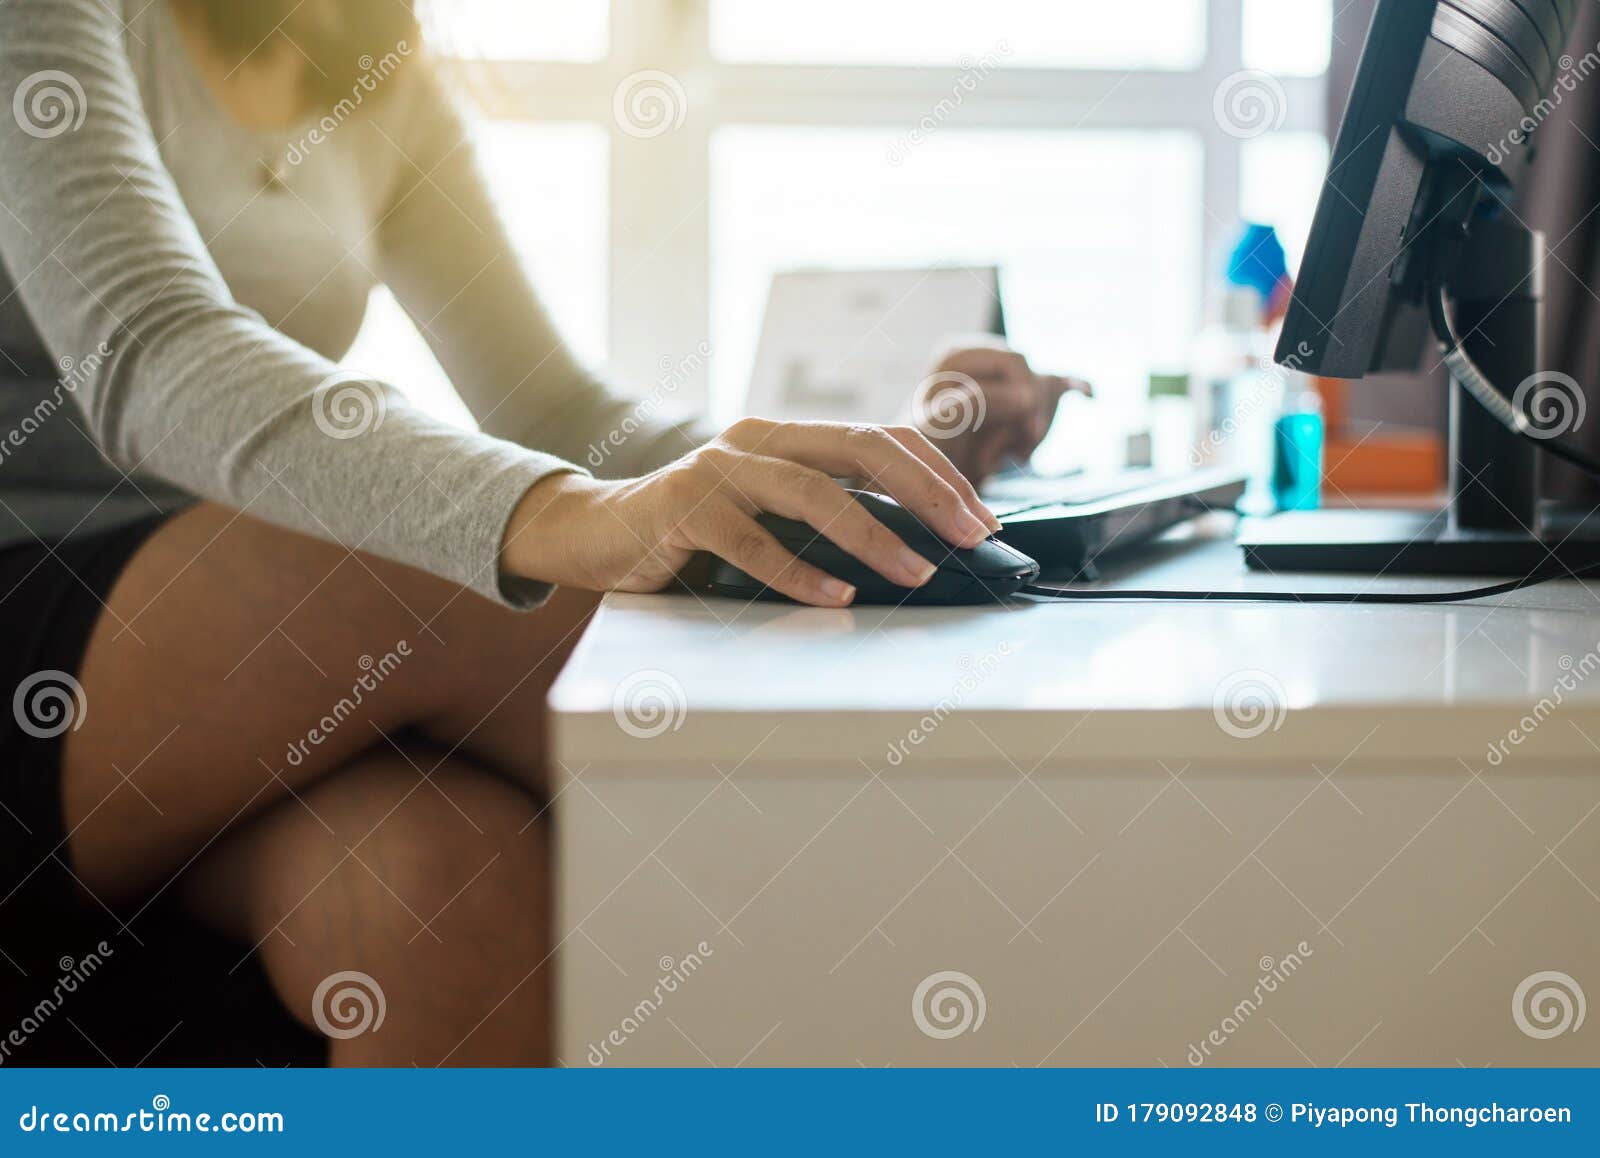 close up of hands woman clicking mouse and using computer,work at home,working from home